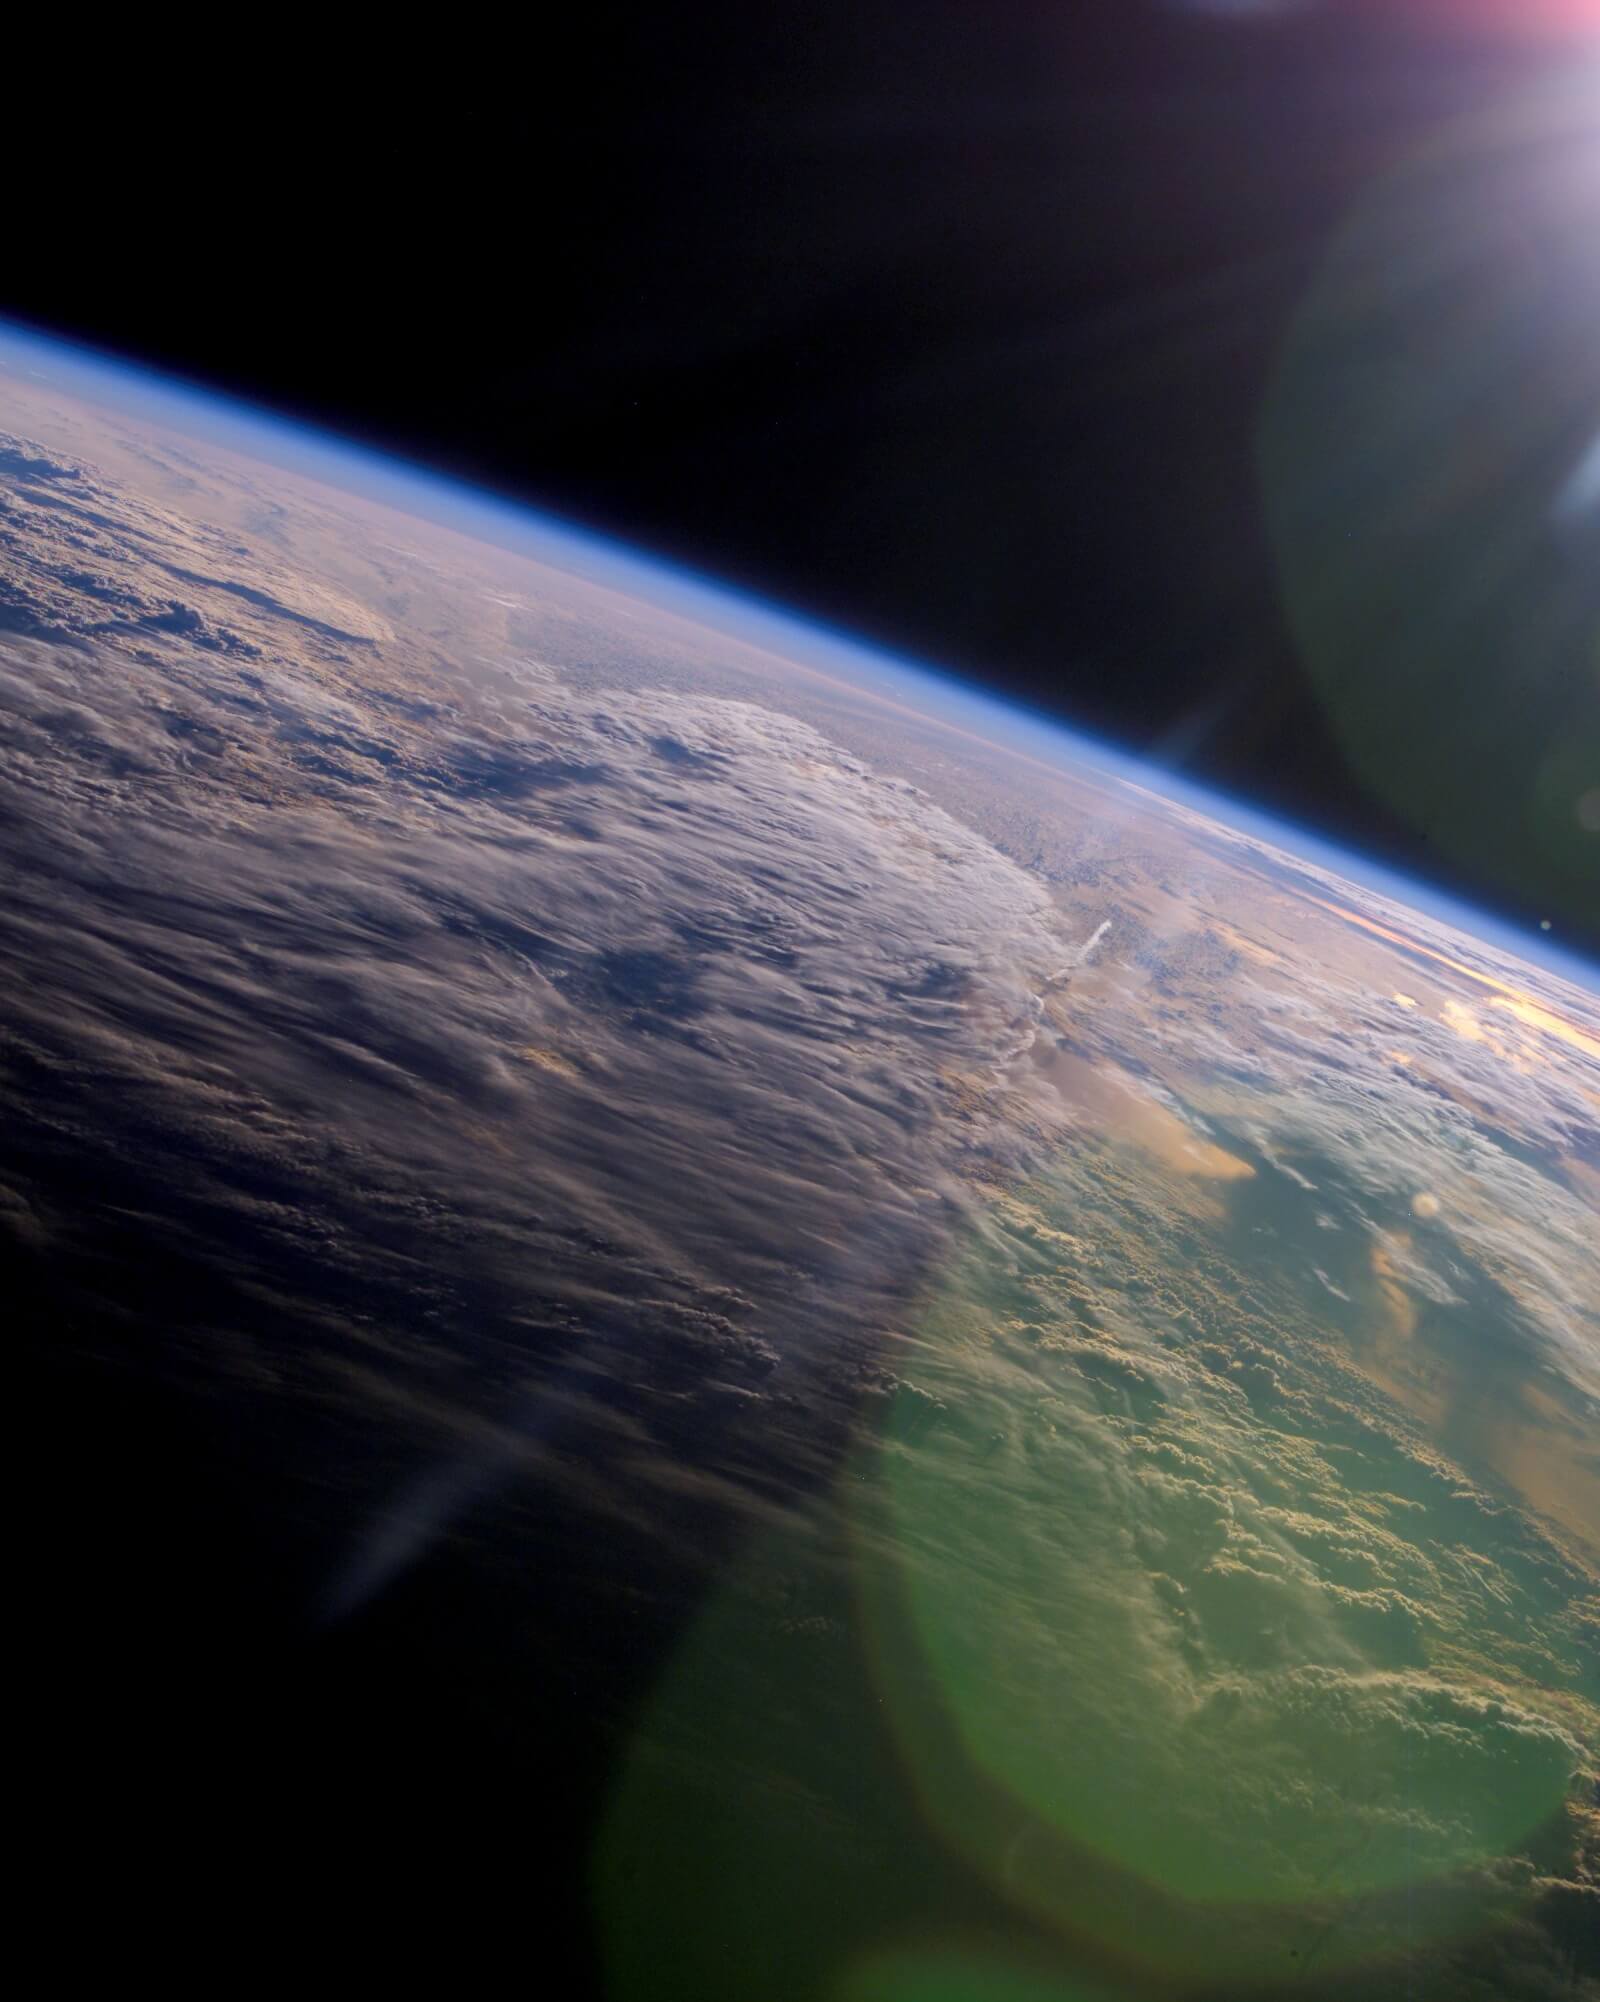 Earth as seen from the International Space Station (ISS)